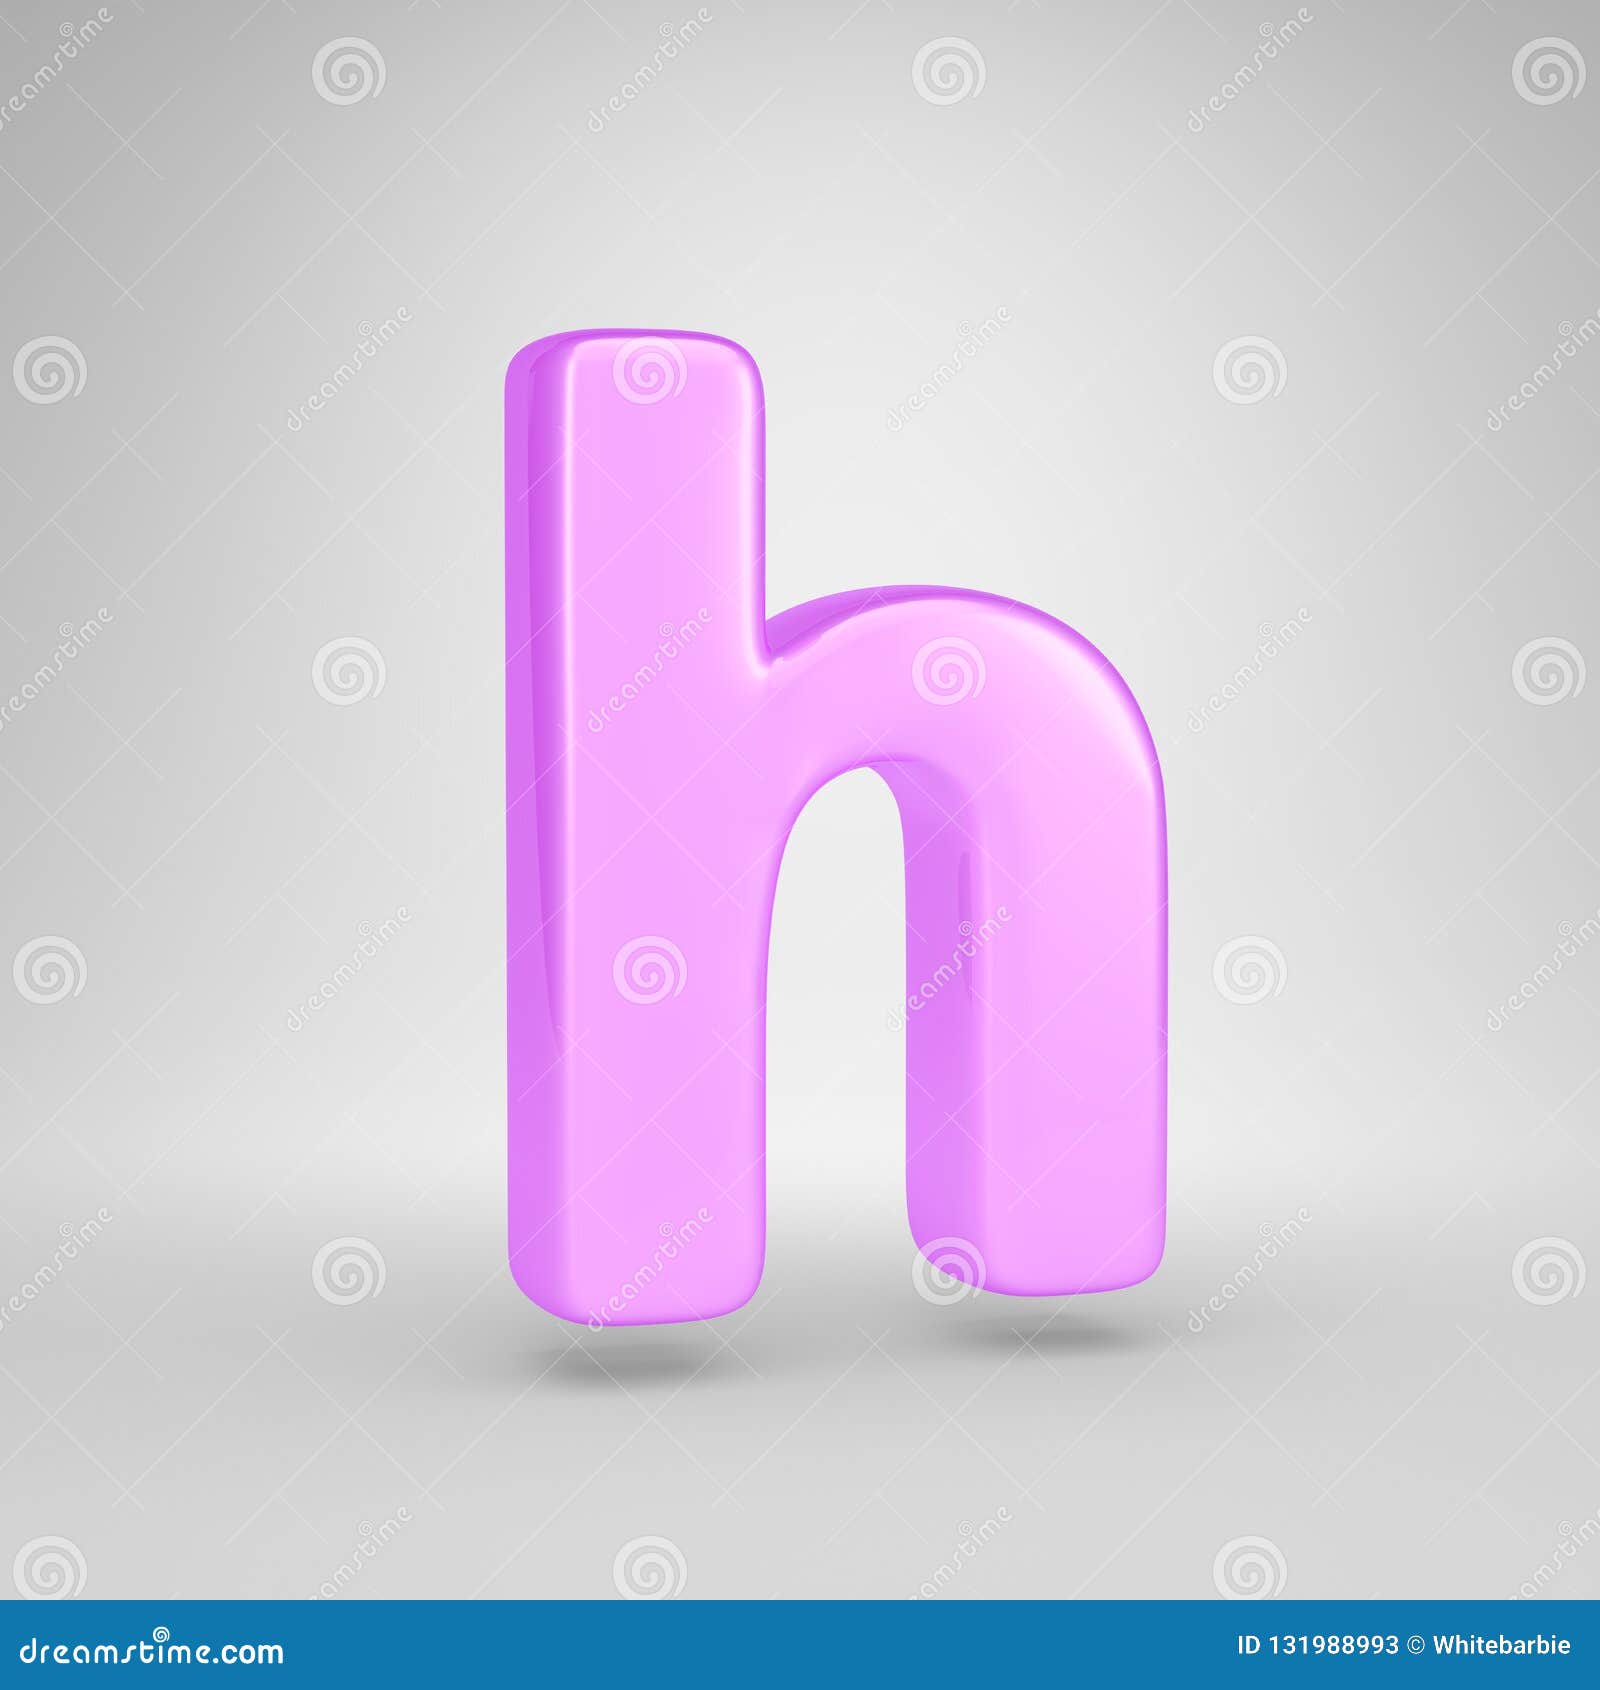 Glossy Pink Bubble Gum Letter H Lowercase Isolated On ...